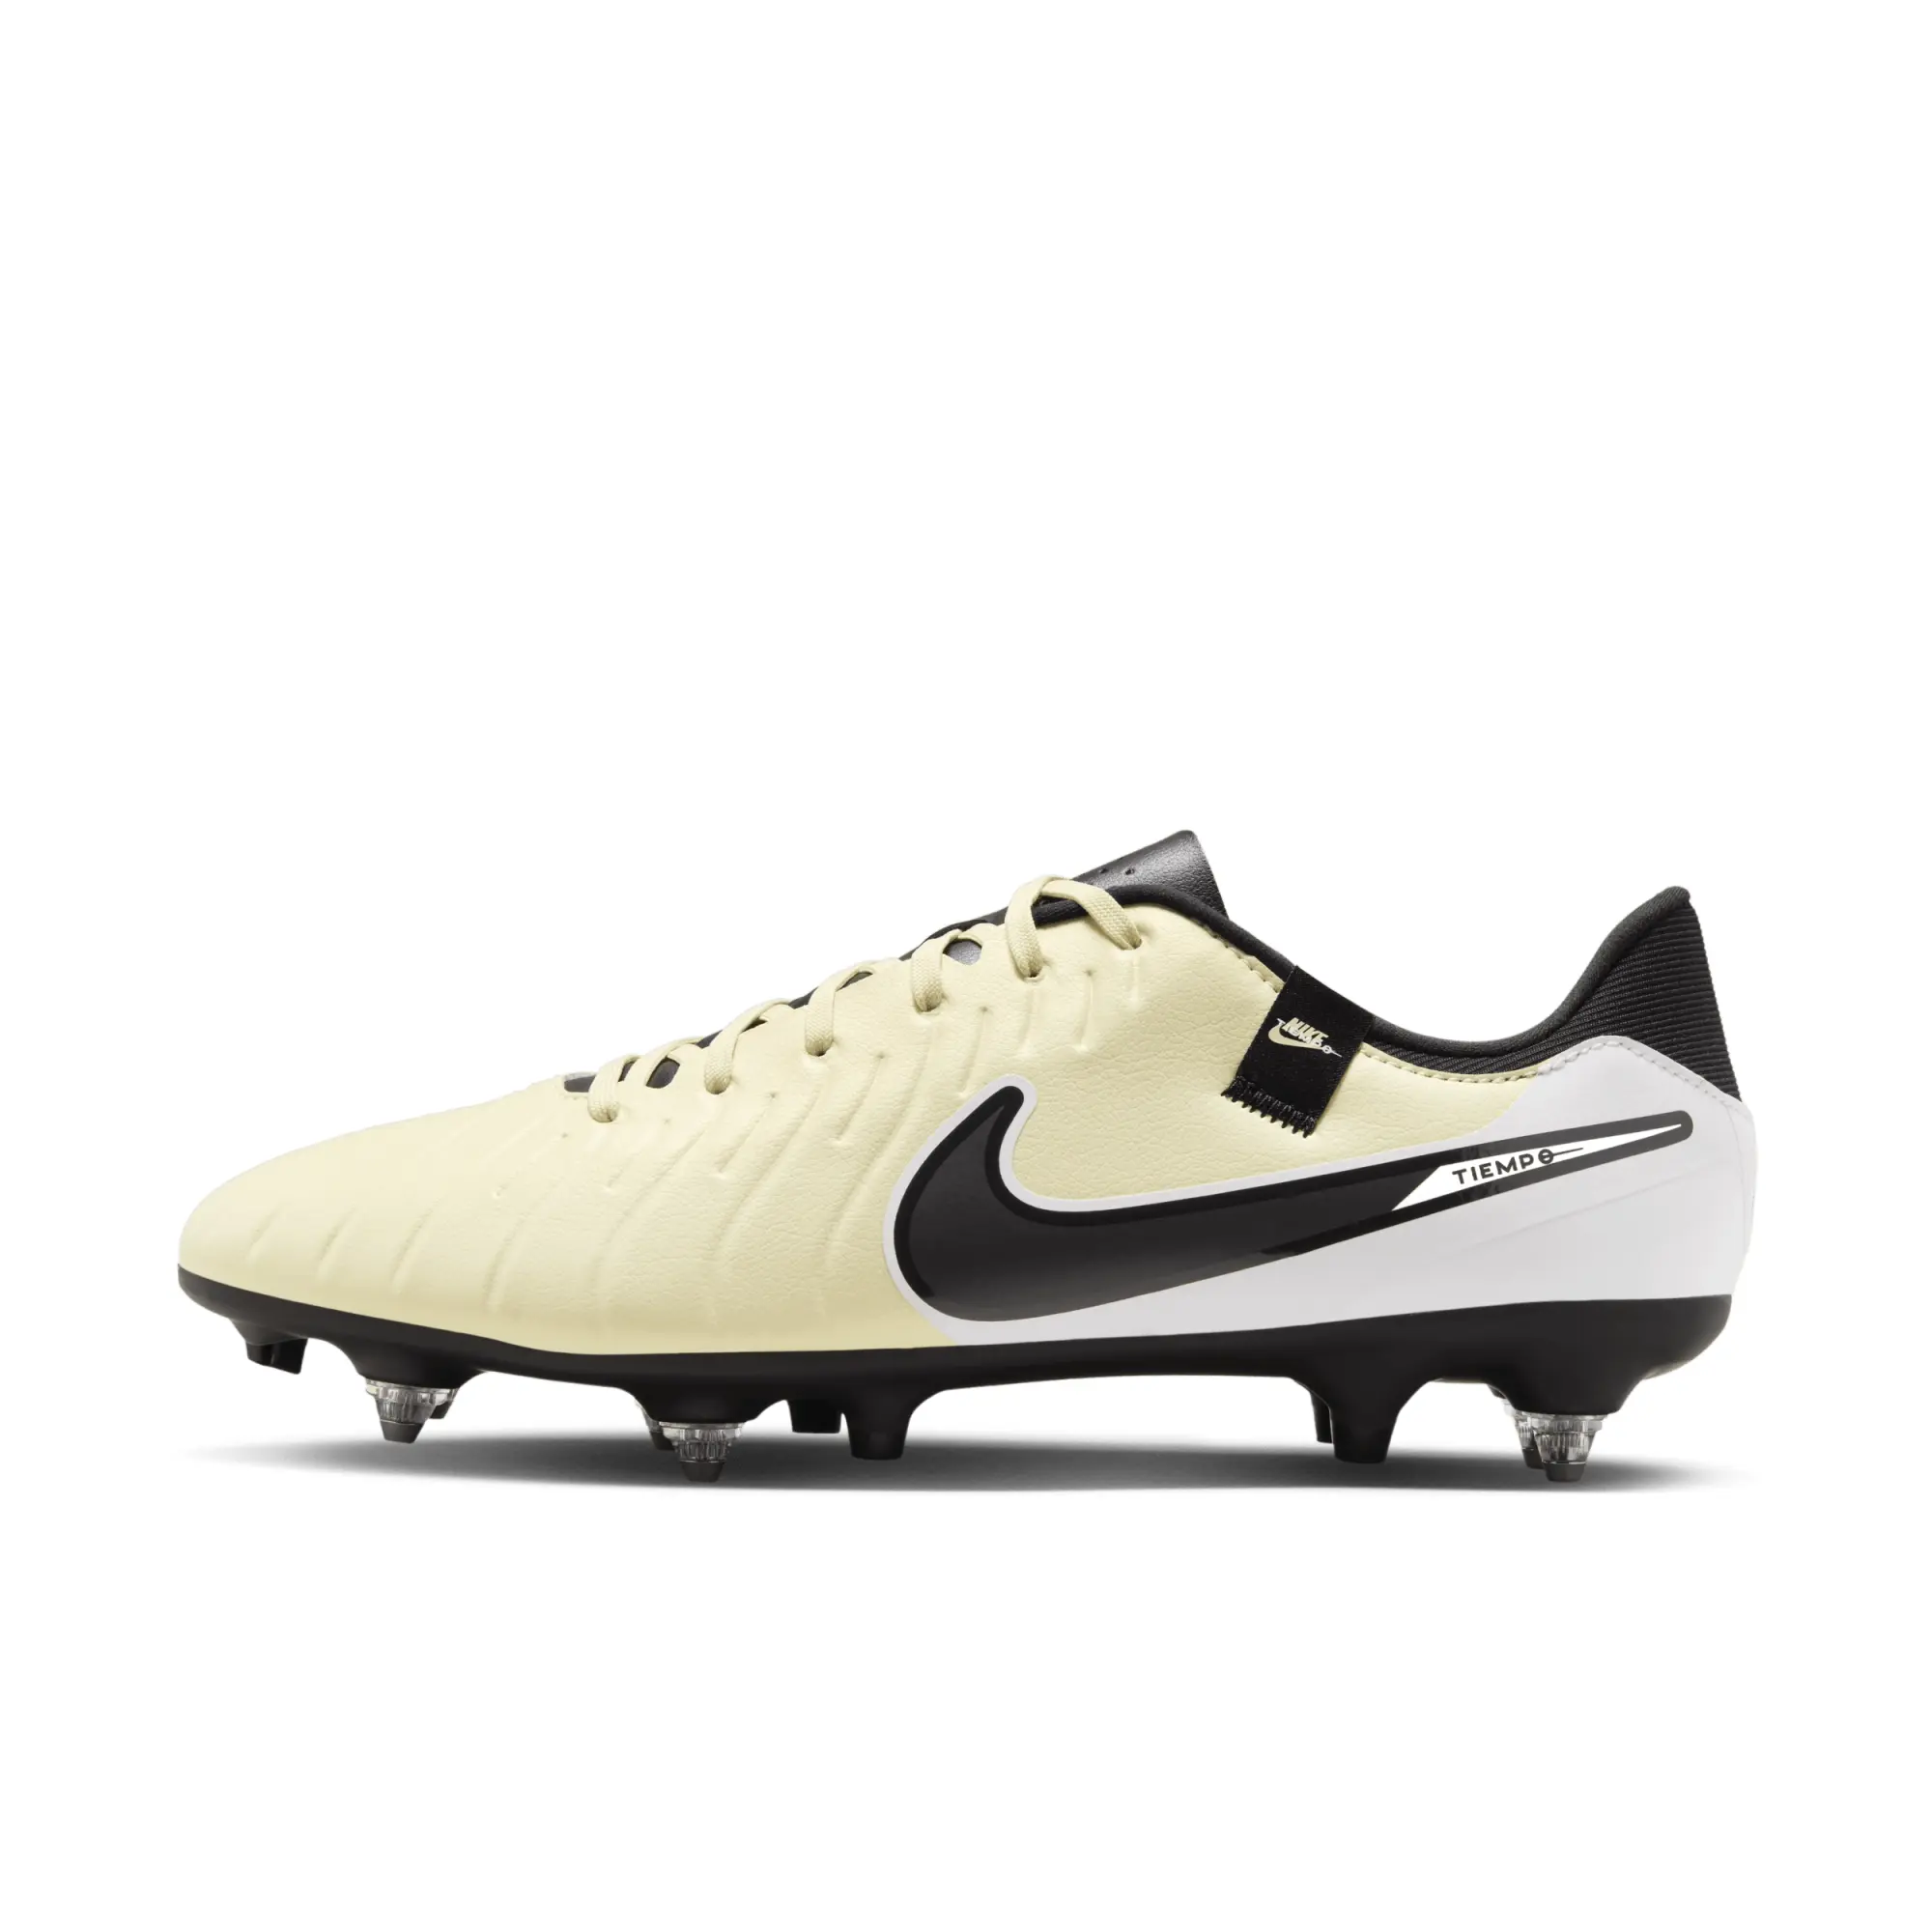 Nike Tiempo Academy SG Adults Football Boots